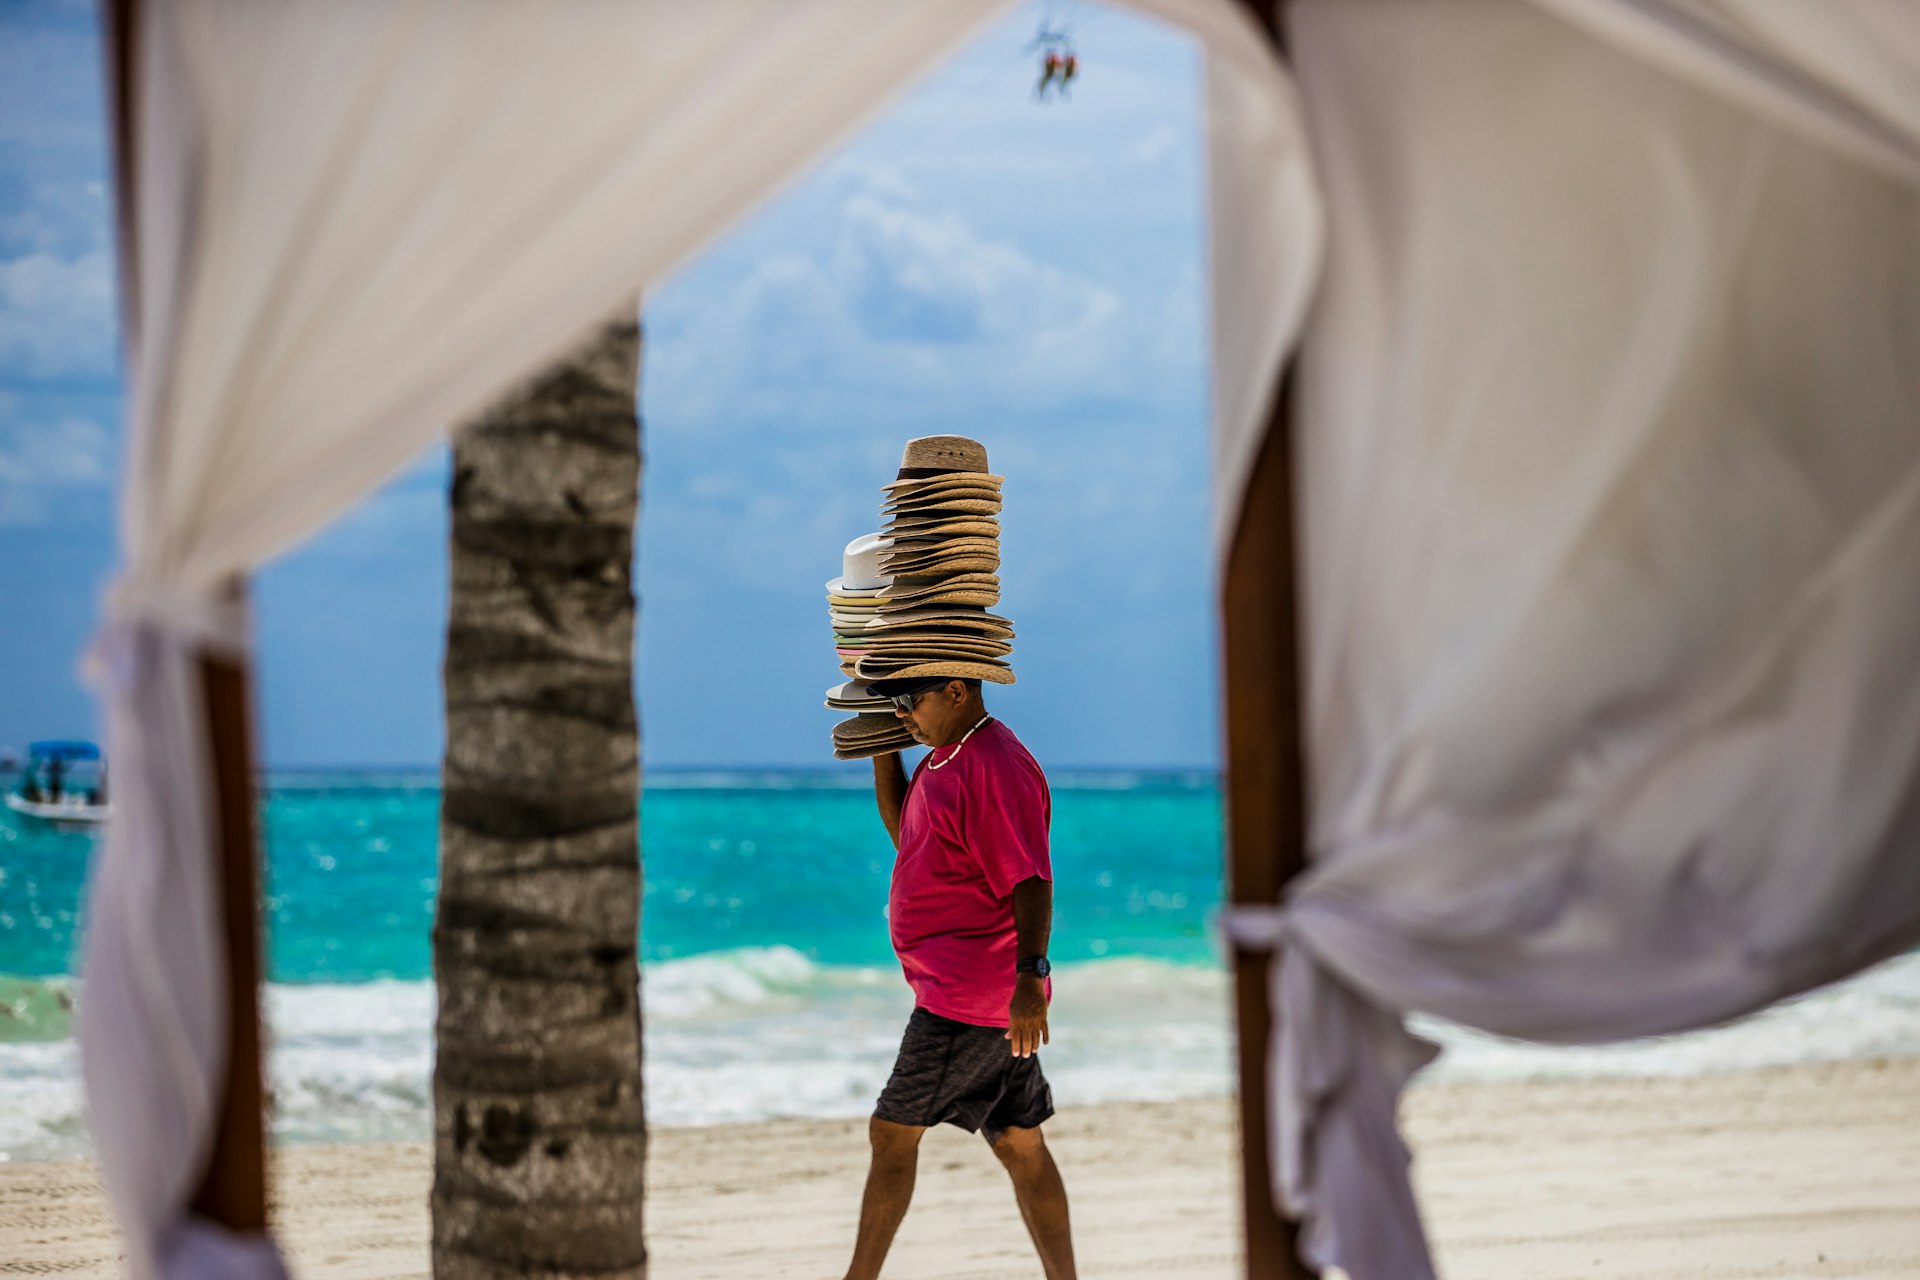 Vendor in Mexico on the beach selling hats while wearing a stack of hats on his head